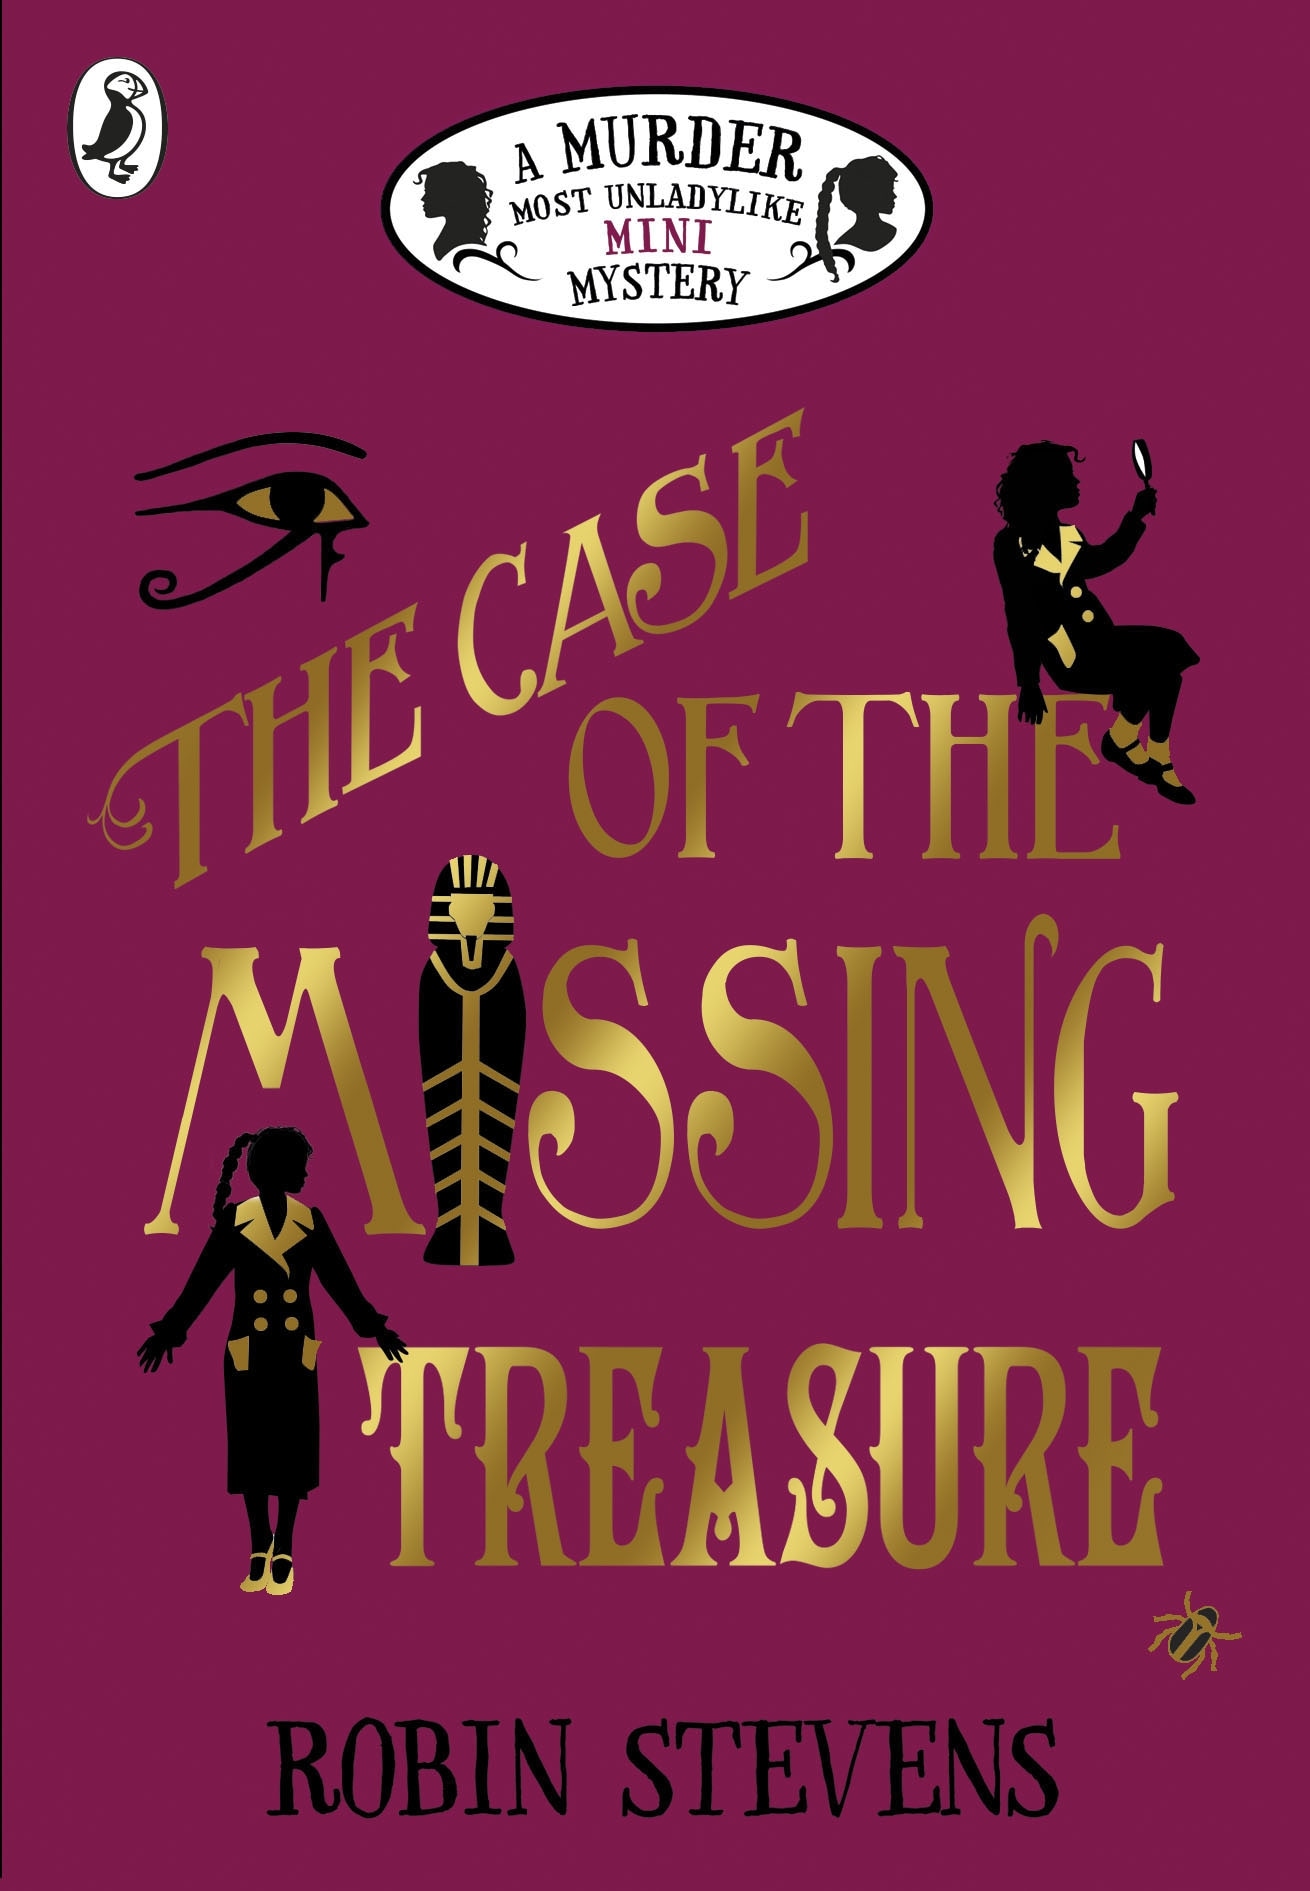 Book “The Case of the Missing Treasure” by Robin Stevens — March 7, 2019